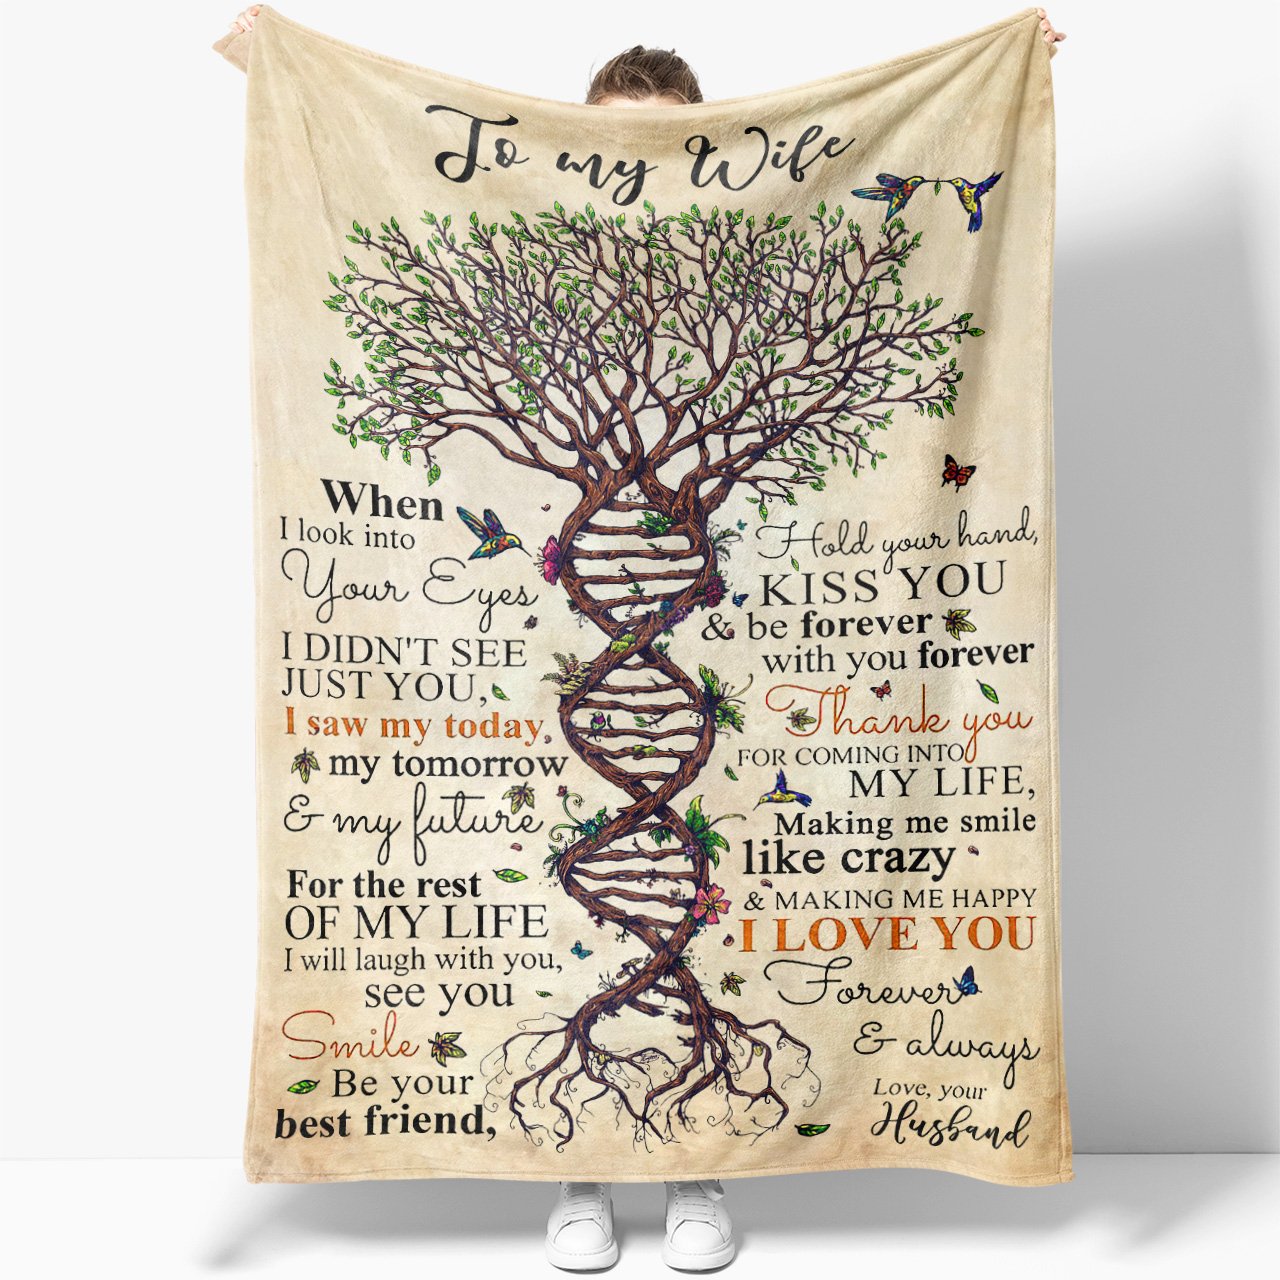 To My Wife Thank You For Coming Into My Life Blanket Gift For Wife From Husband Birthday Gift Home Decor Bedding Couch Sofa Soft and Comfy Cozy